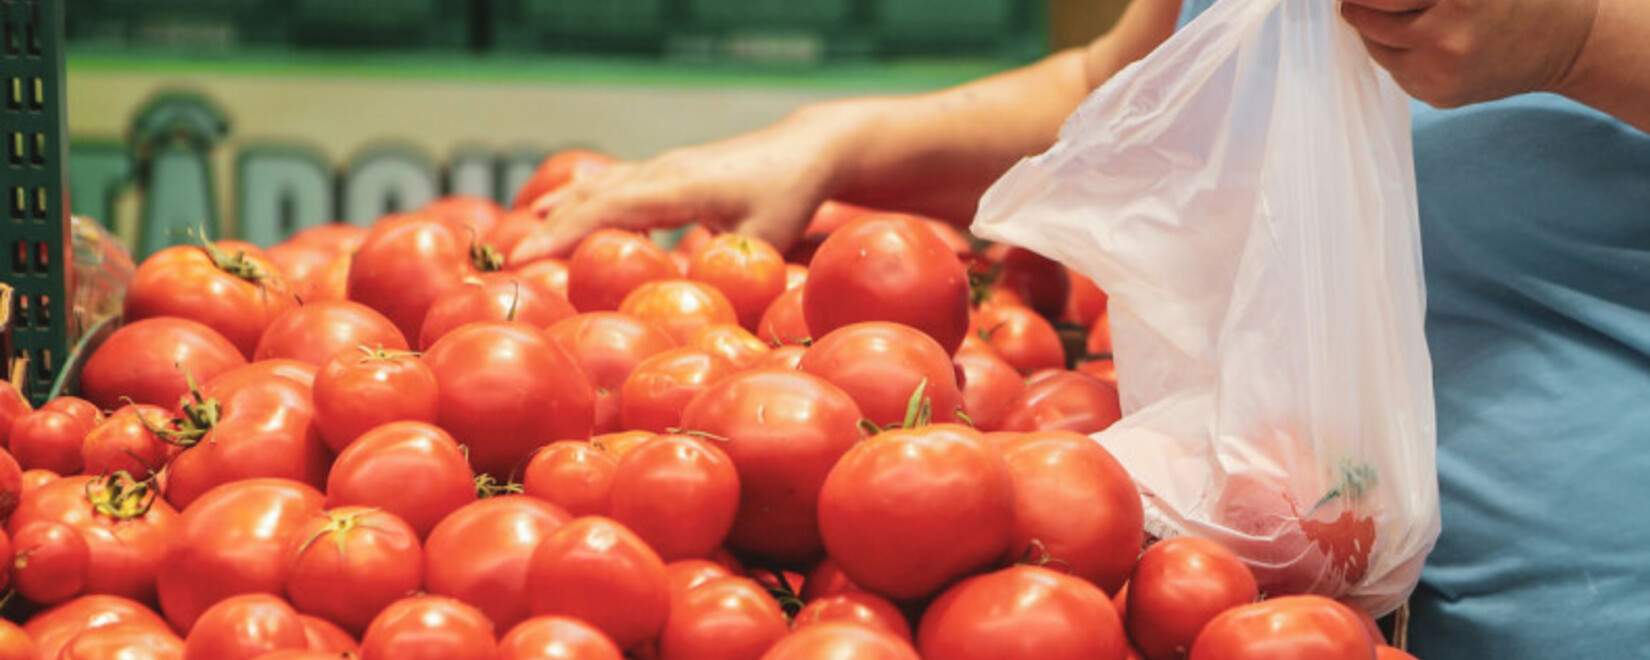 Brown crinkle virus detected in a batch of tomatoes from Turkey